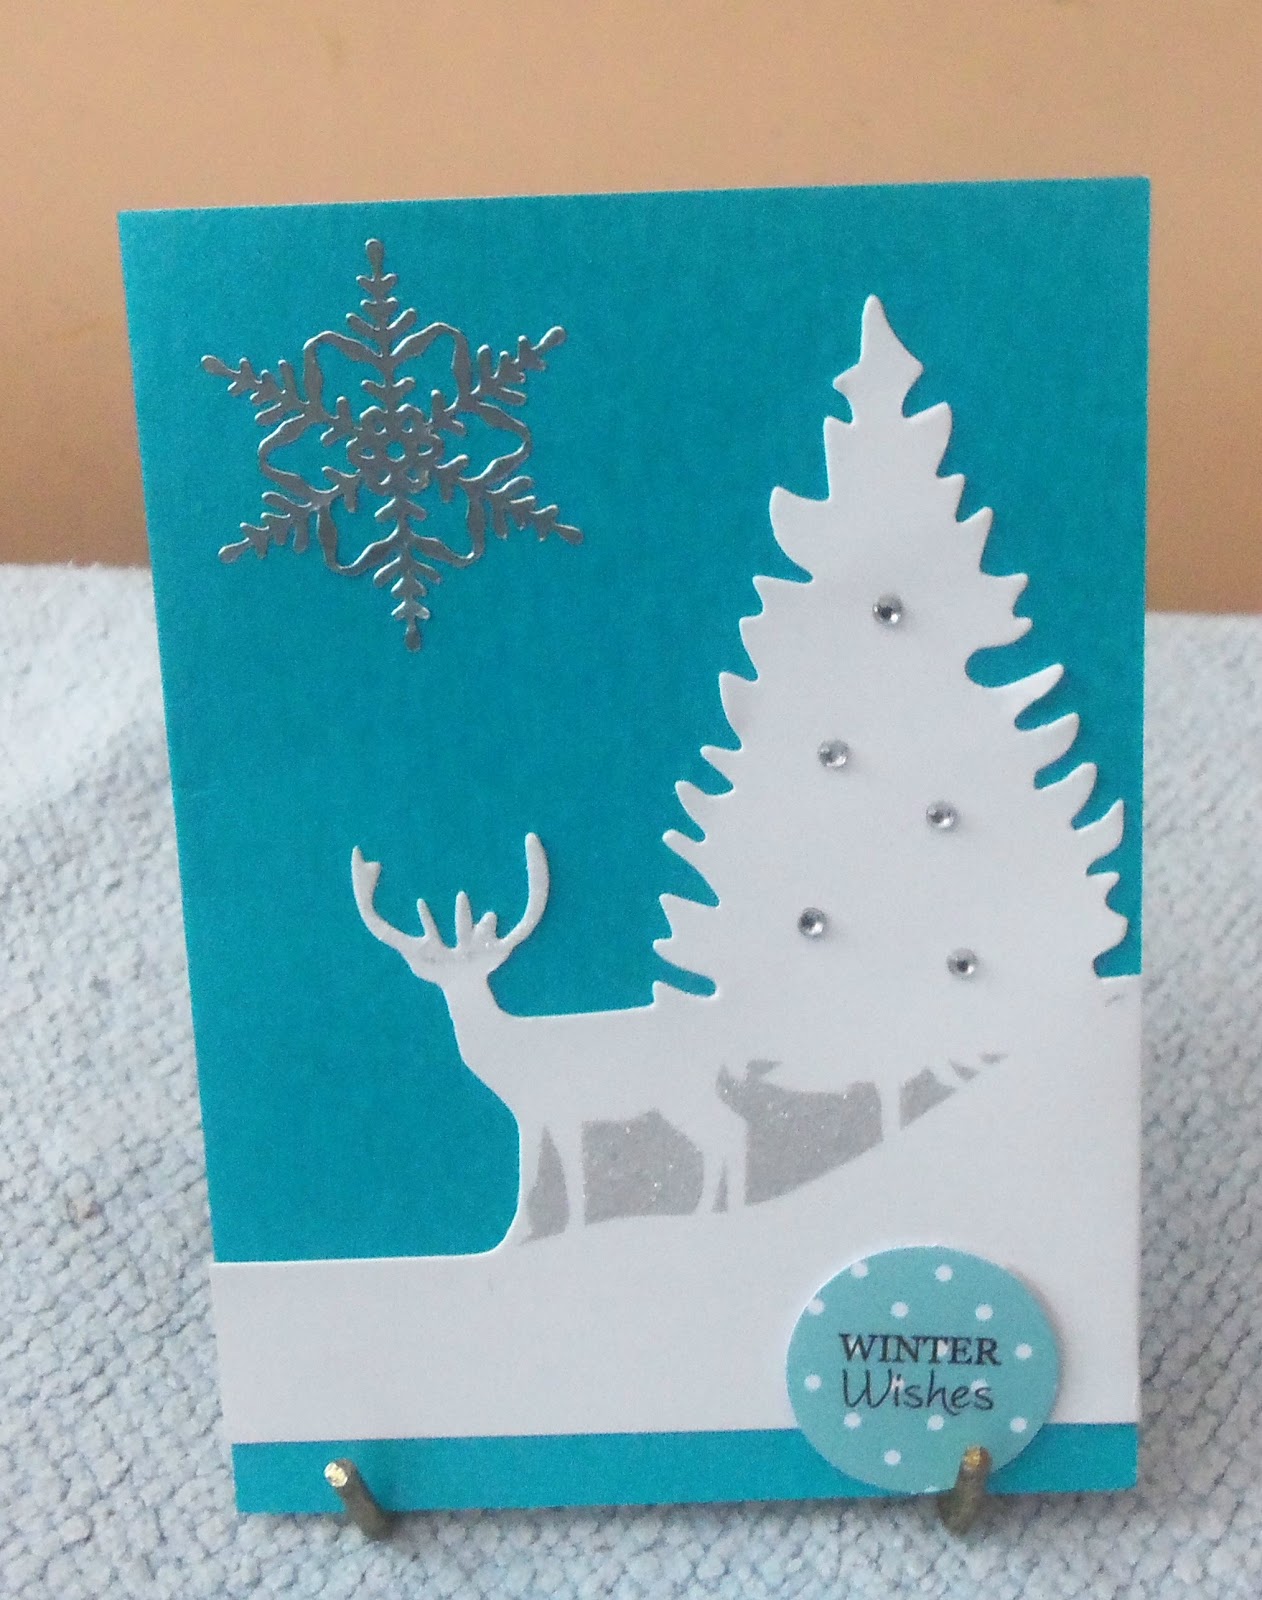 Alizabethy - Card Making Addict!: Christmas Cards for Pagans